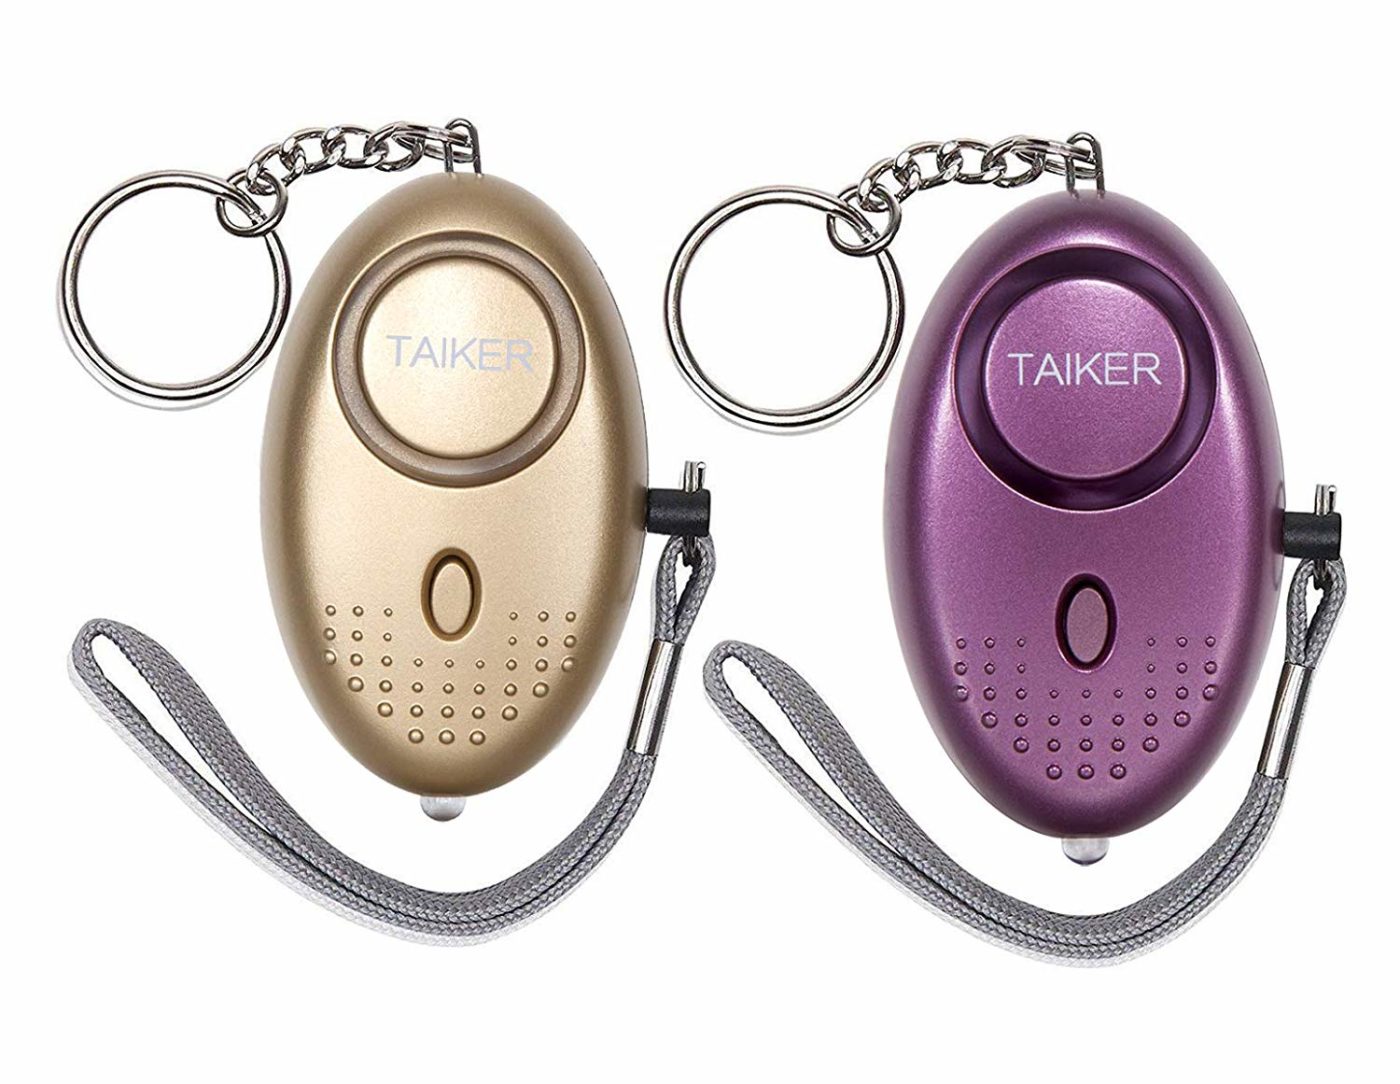 10 Best Self-Defense Keychain Reviews: A Useful Travel Safety Gadget Alert You Have Attached An Undersized